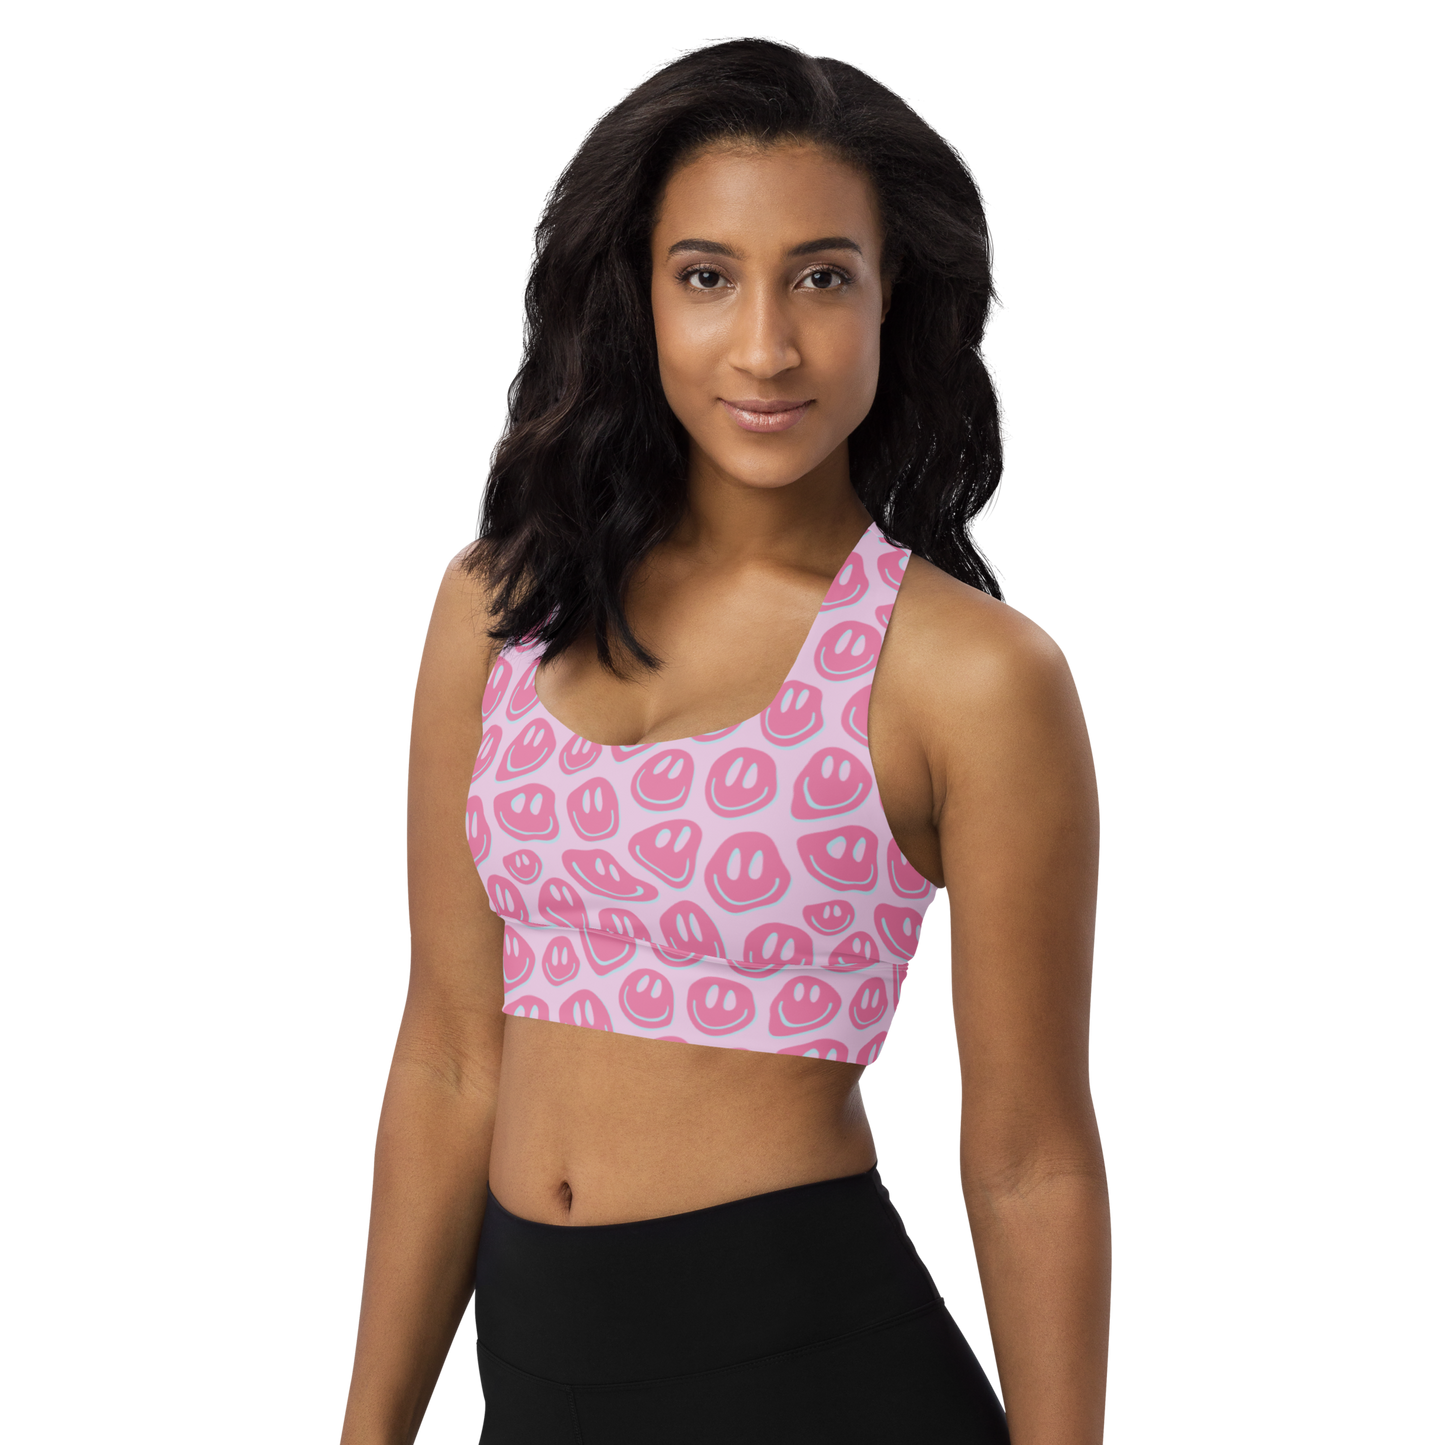 Load image into Gallery viewer, Pink Smiley Sports Bra
